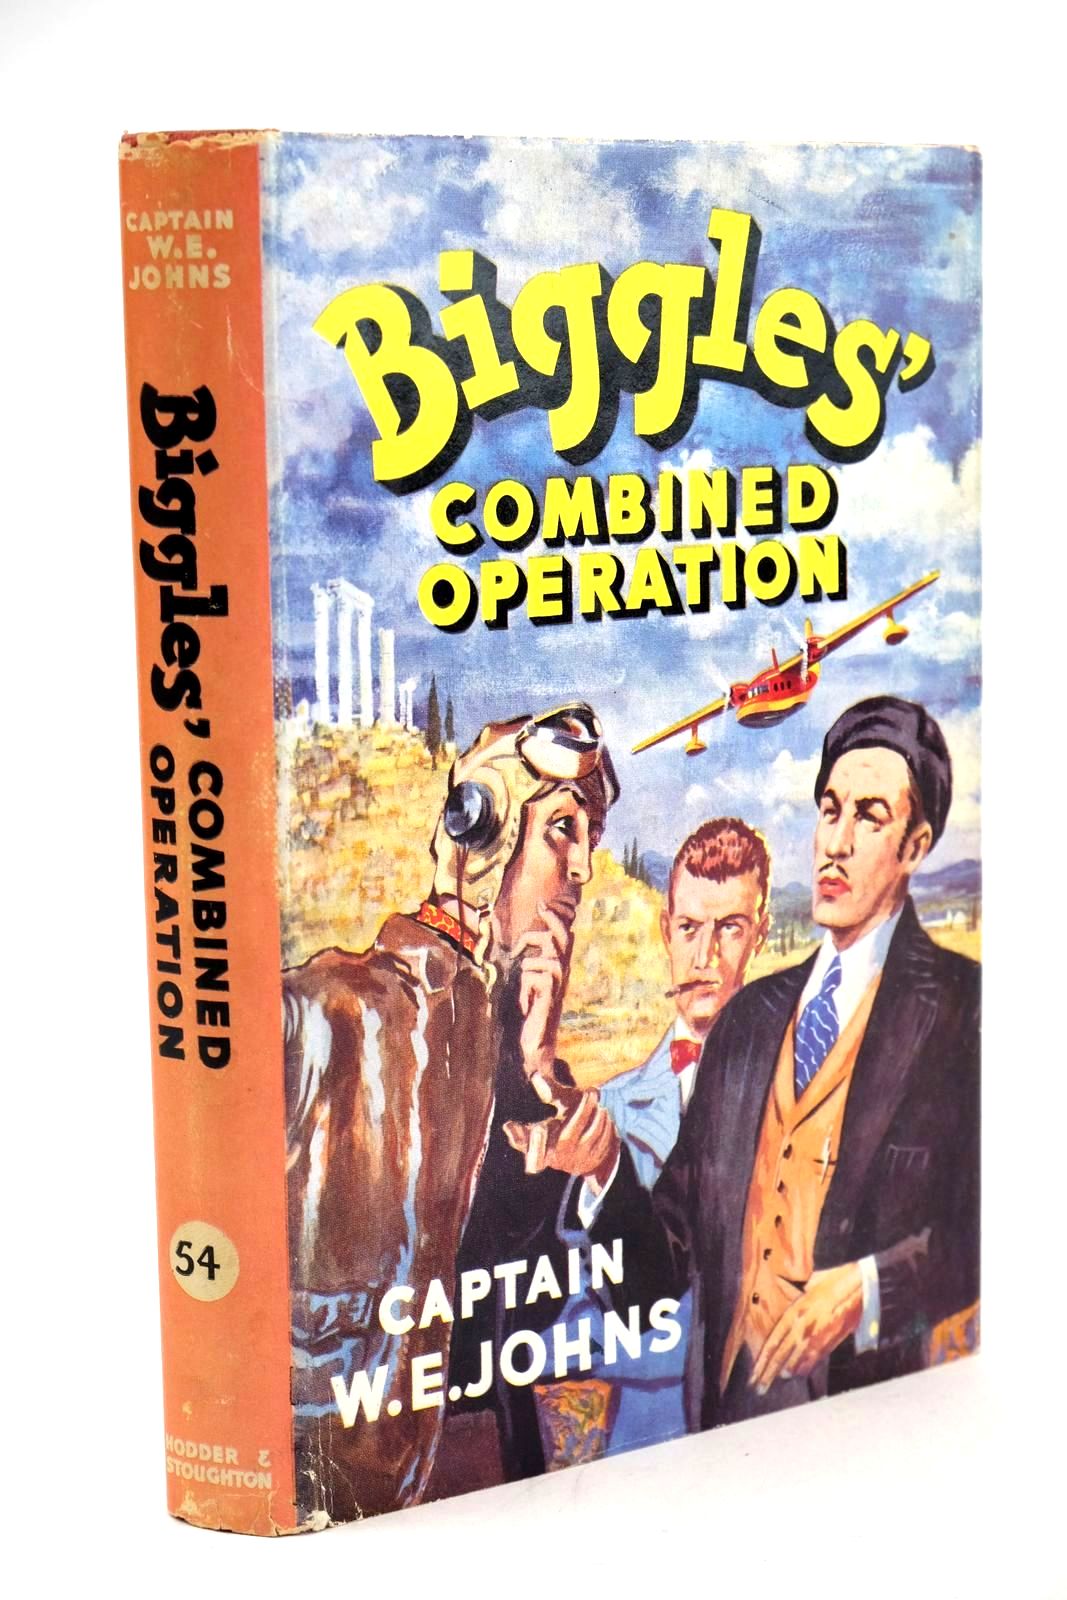 Photo of BIGGLES' COMBINED OPERATION written by Johns, W.E. illustrated by Stead,  published by Hodder &amp; Stoughton (STOCK CODE: 1324359)  for sale by Stella & Rose's Books